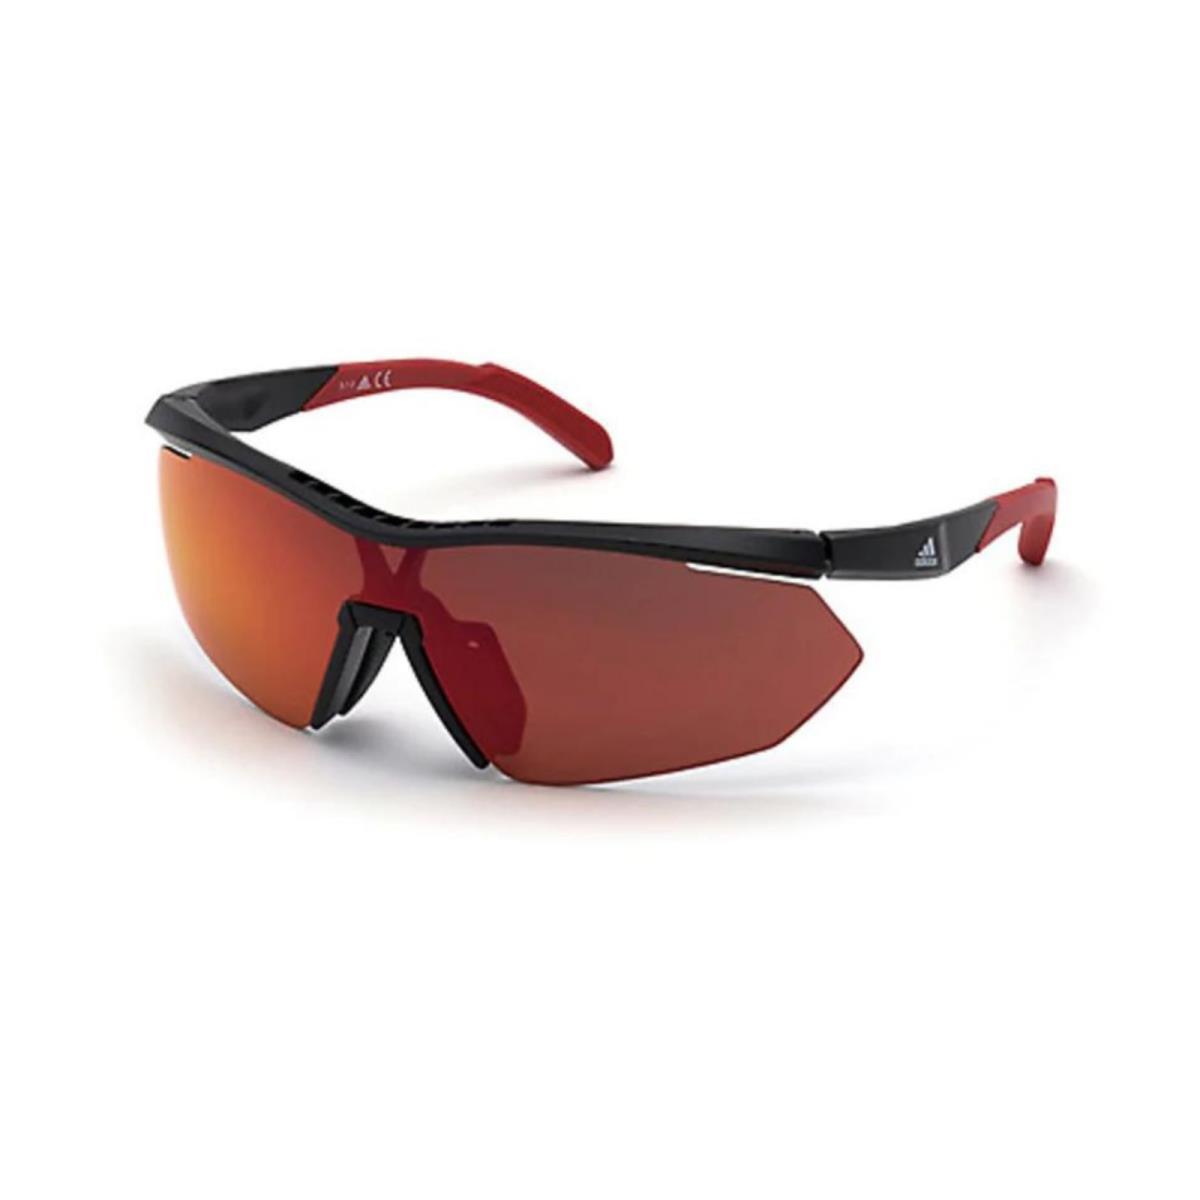 Adidas Sunglasses 0SP0016/S 01L Semi Rimless with Red Mirror For Men